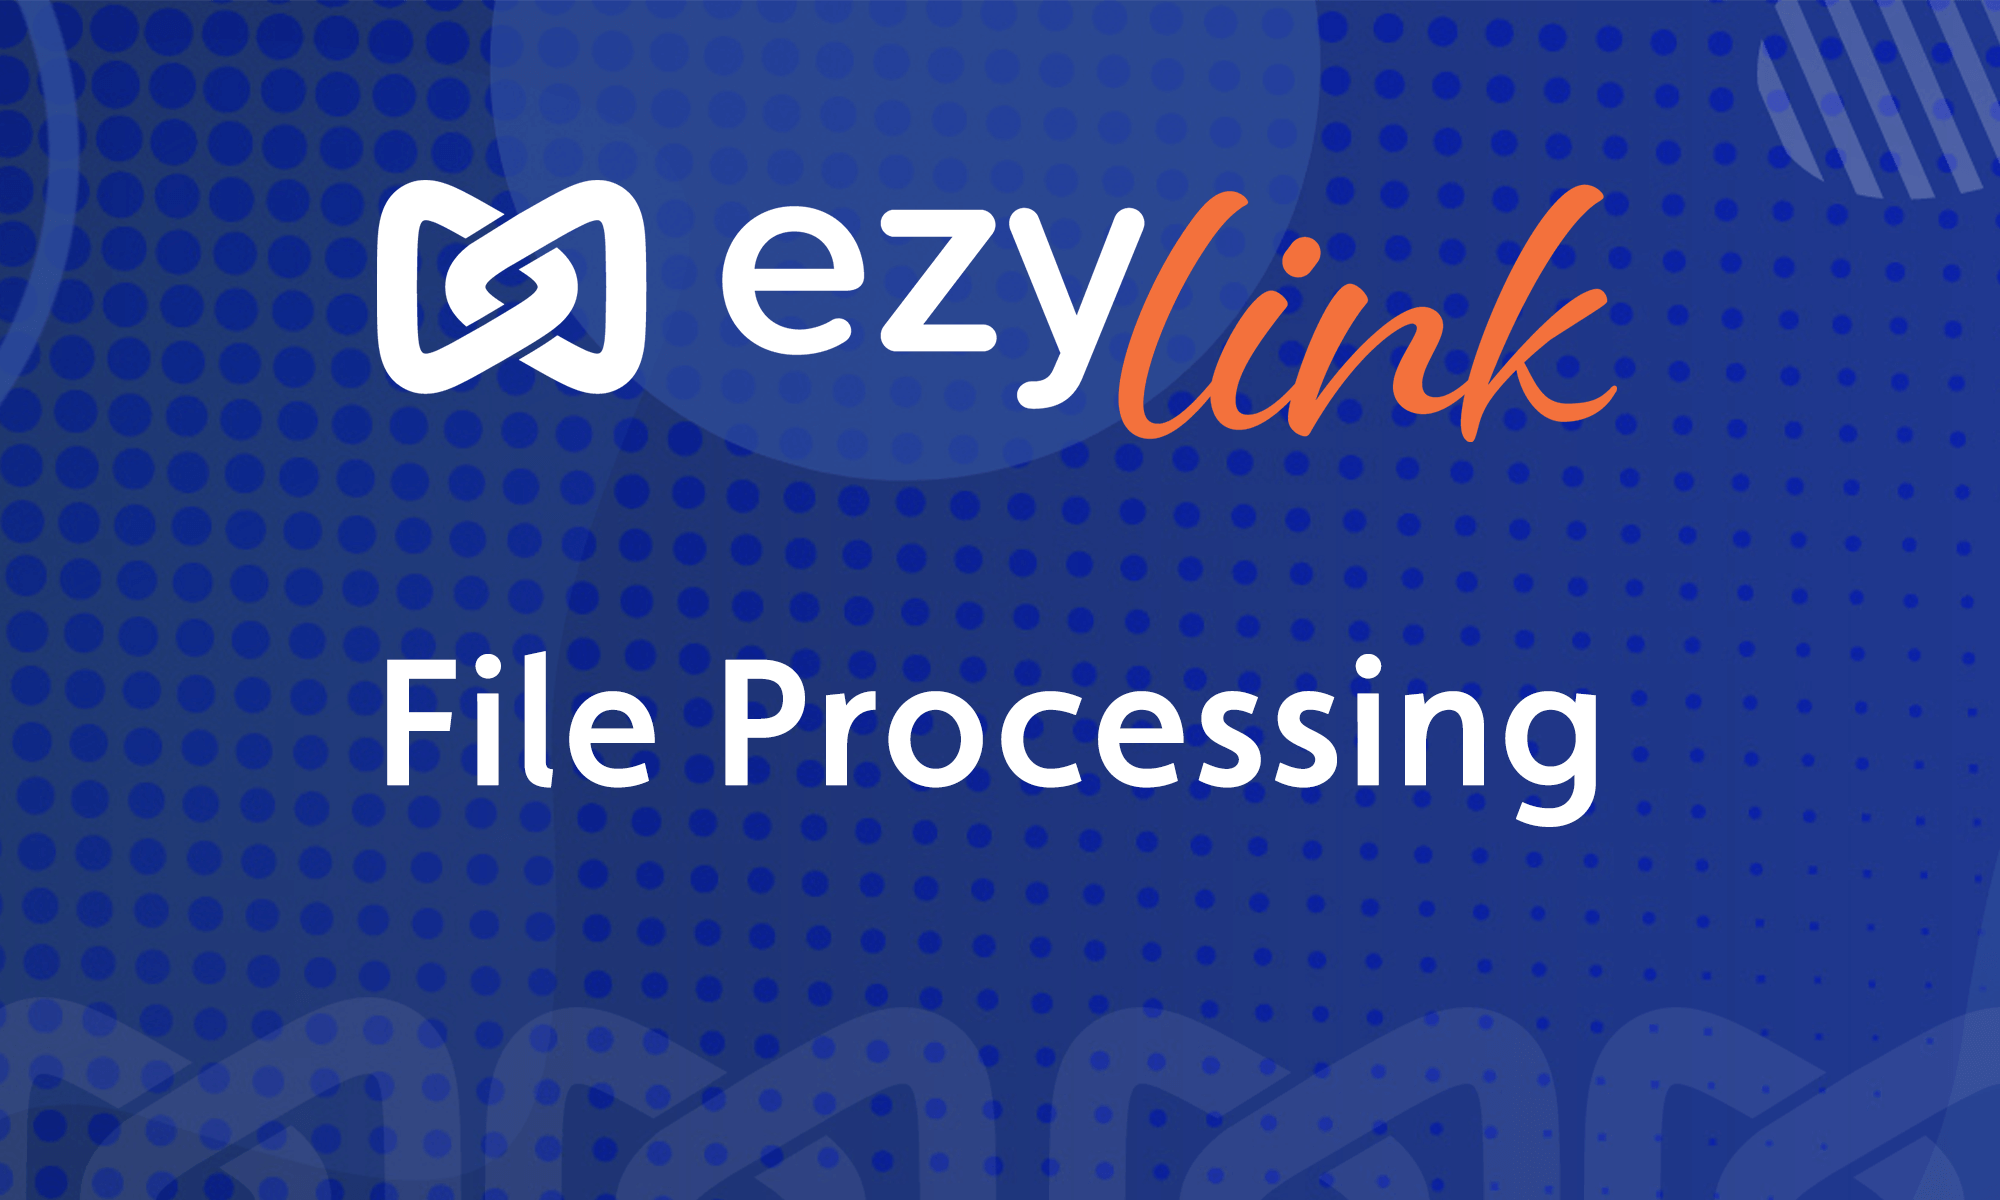 Featured image for “Ezylink Cloud – File Processing”